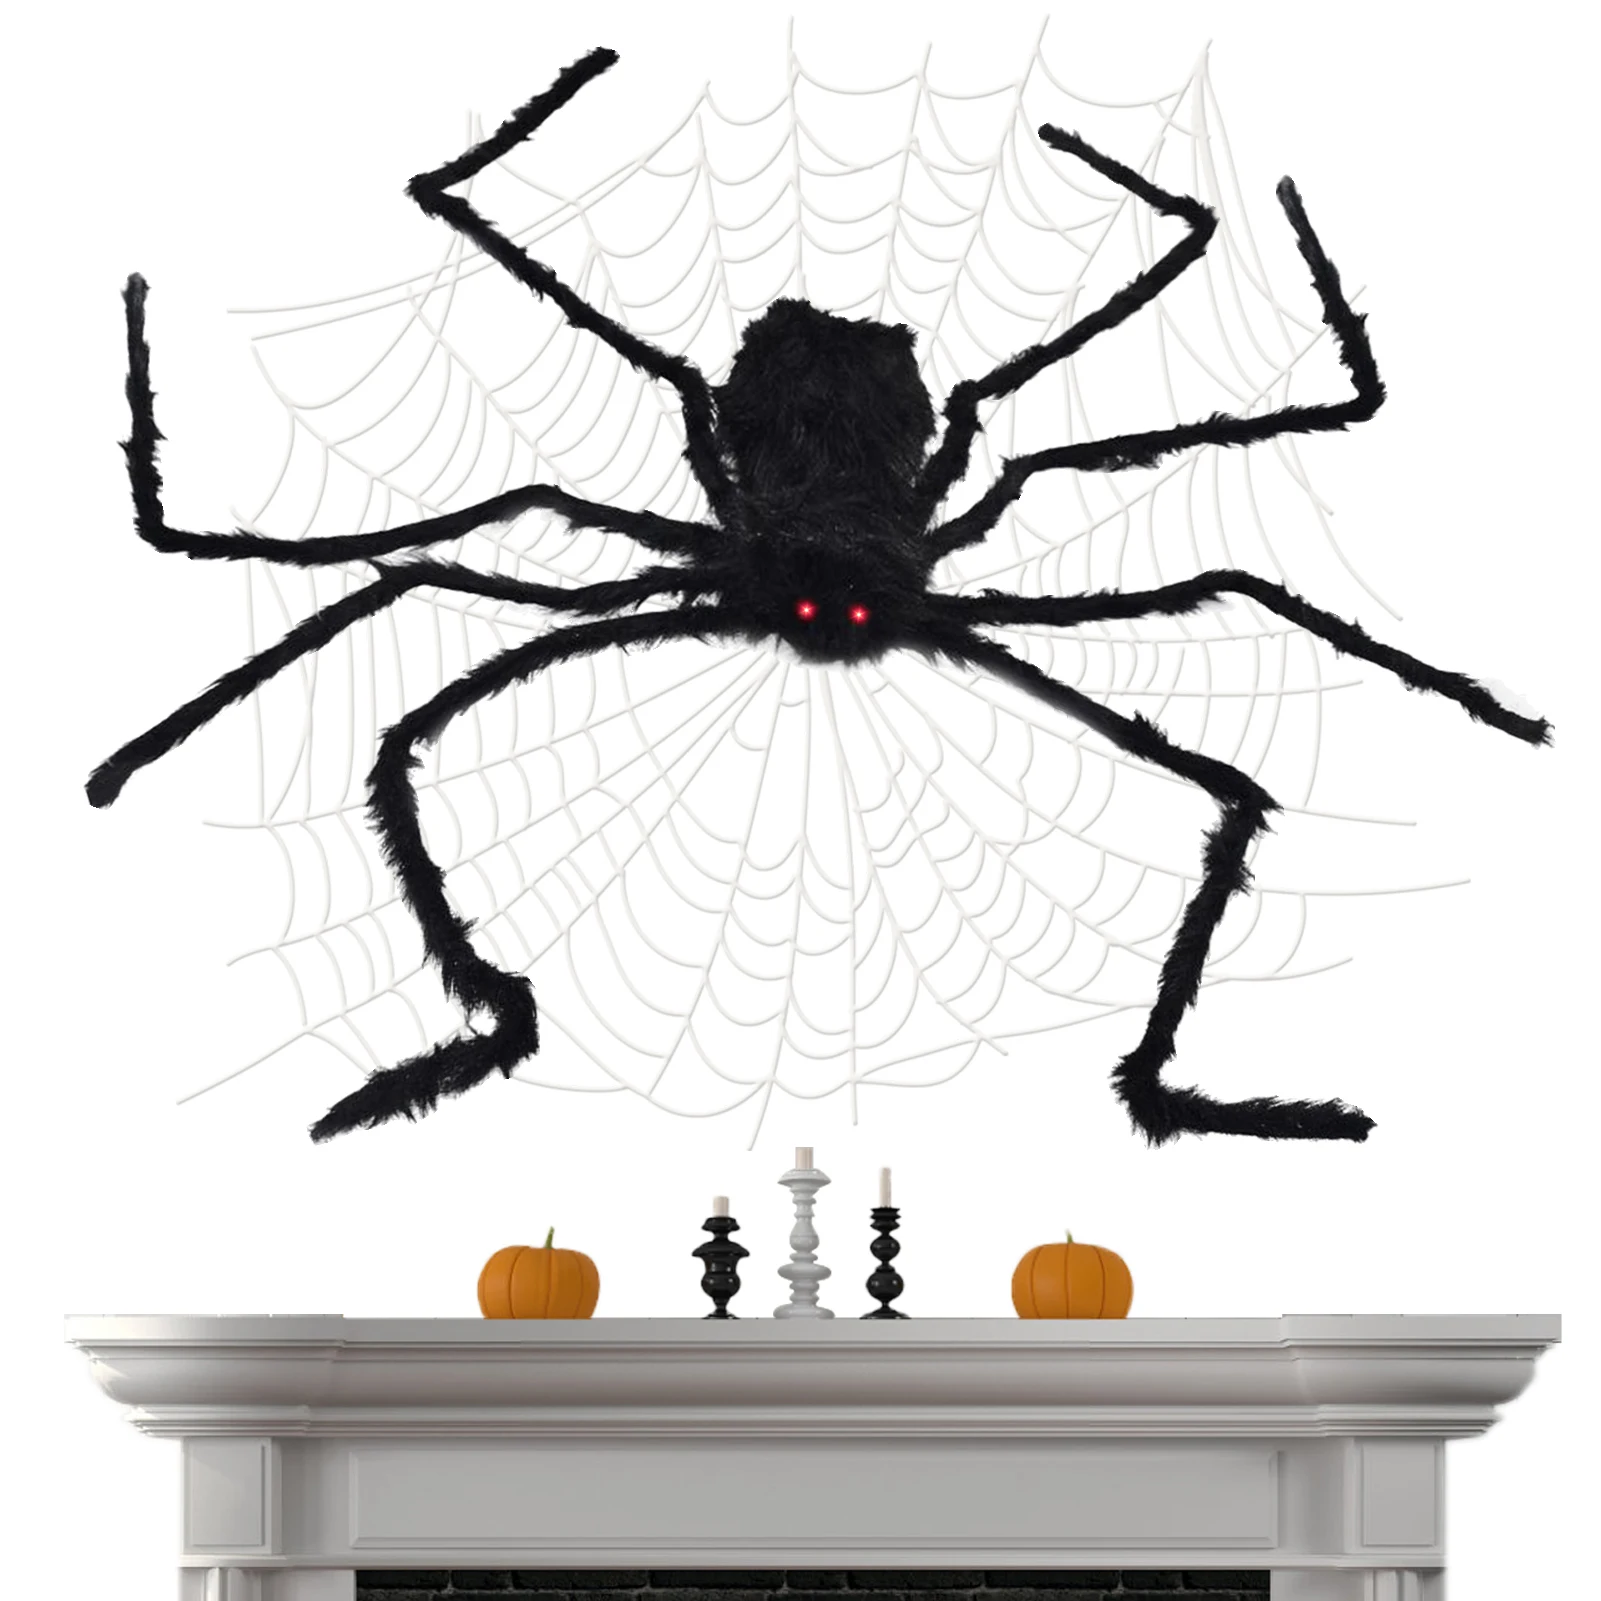 

Halloween Giant Spider Decorations 123cm/4ft Furry Scary Giant Spiders With Spider Web Halloween Party Outdoor Decoration With